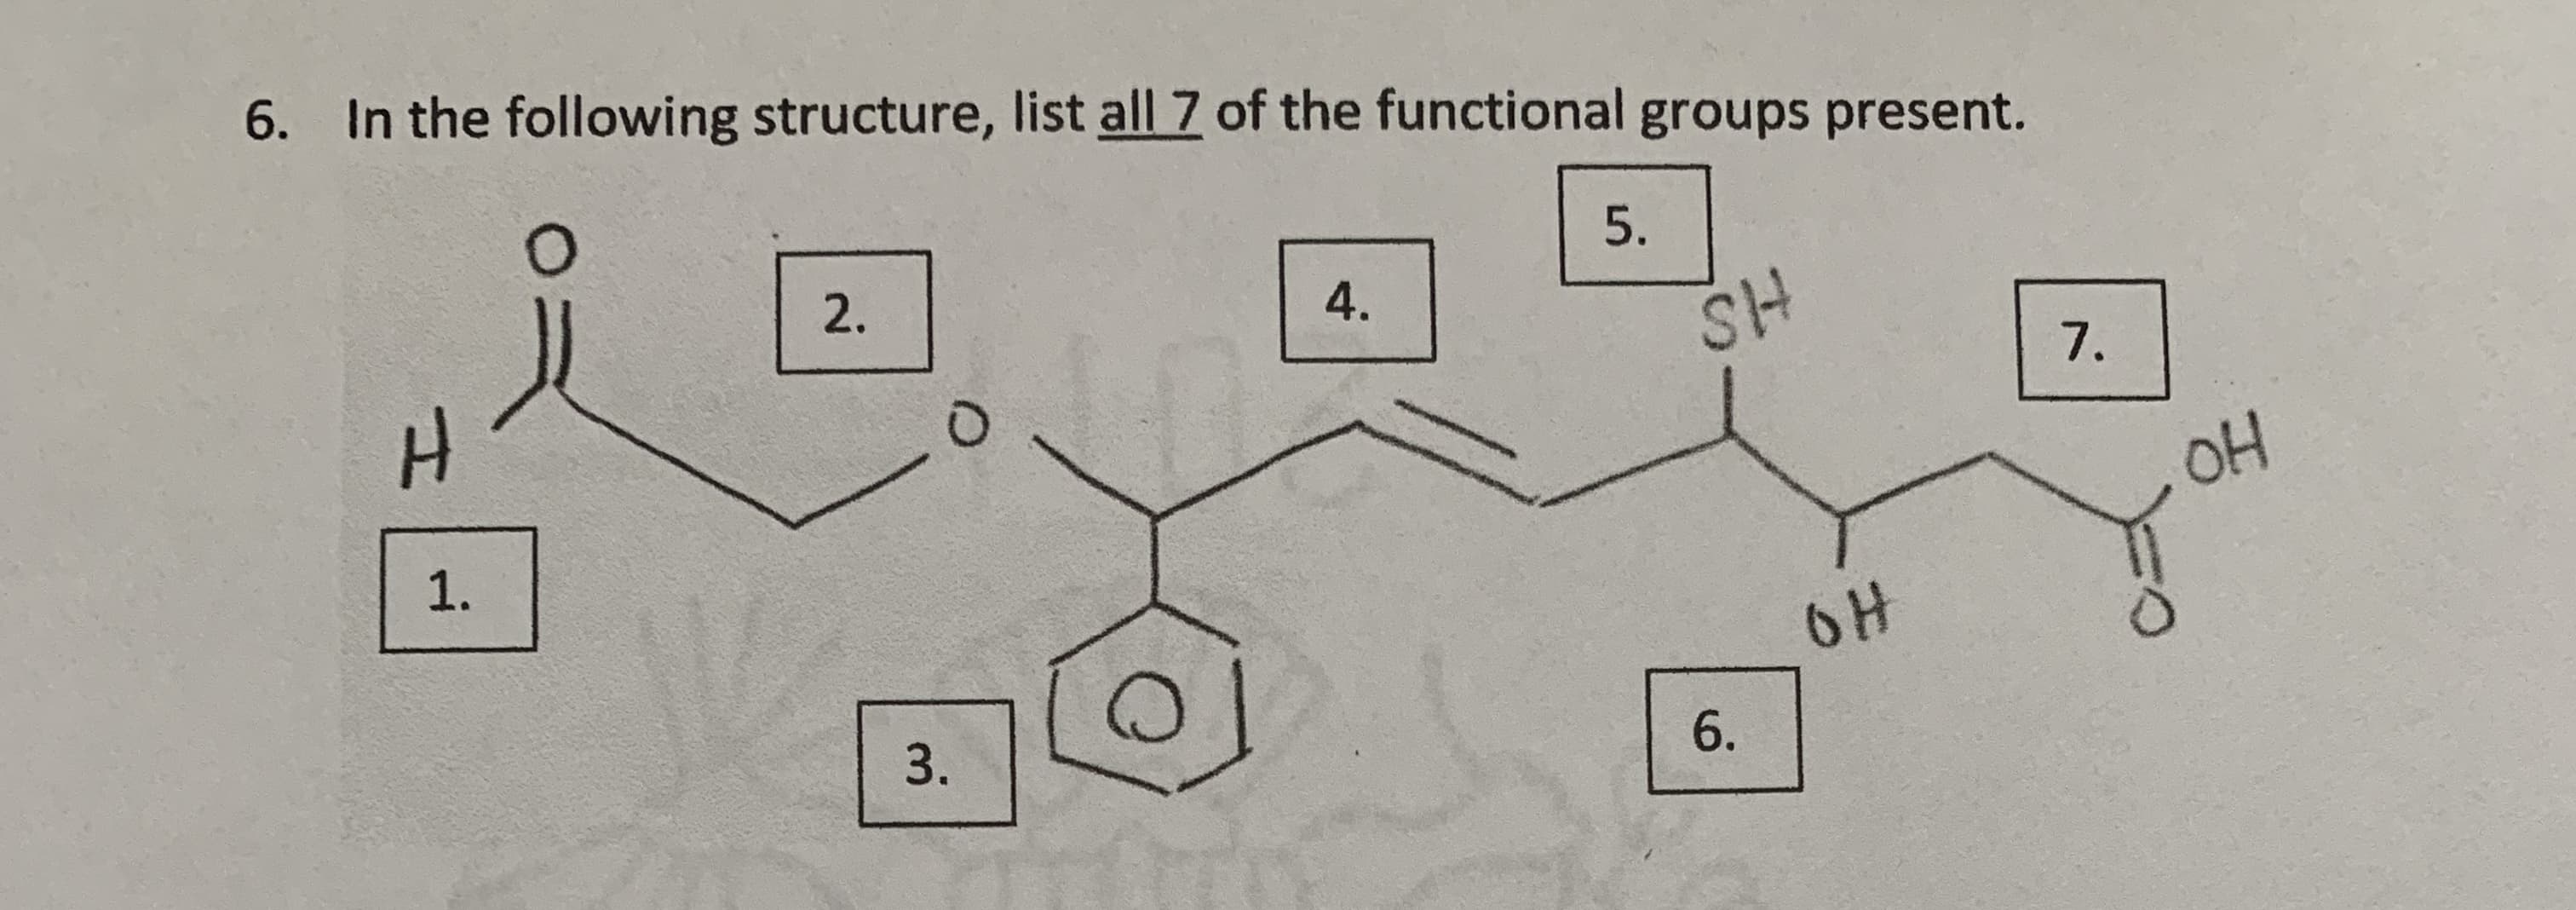 In the following structure, list all 7 of the functional groups present.
5.
A.
7.
2.
OH
OH
1.
6.
3.
